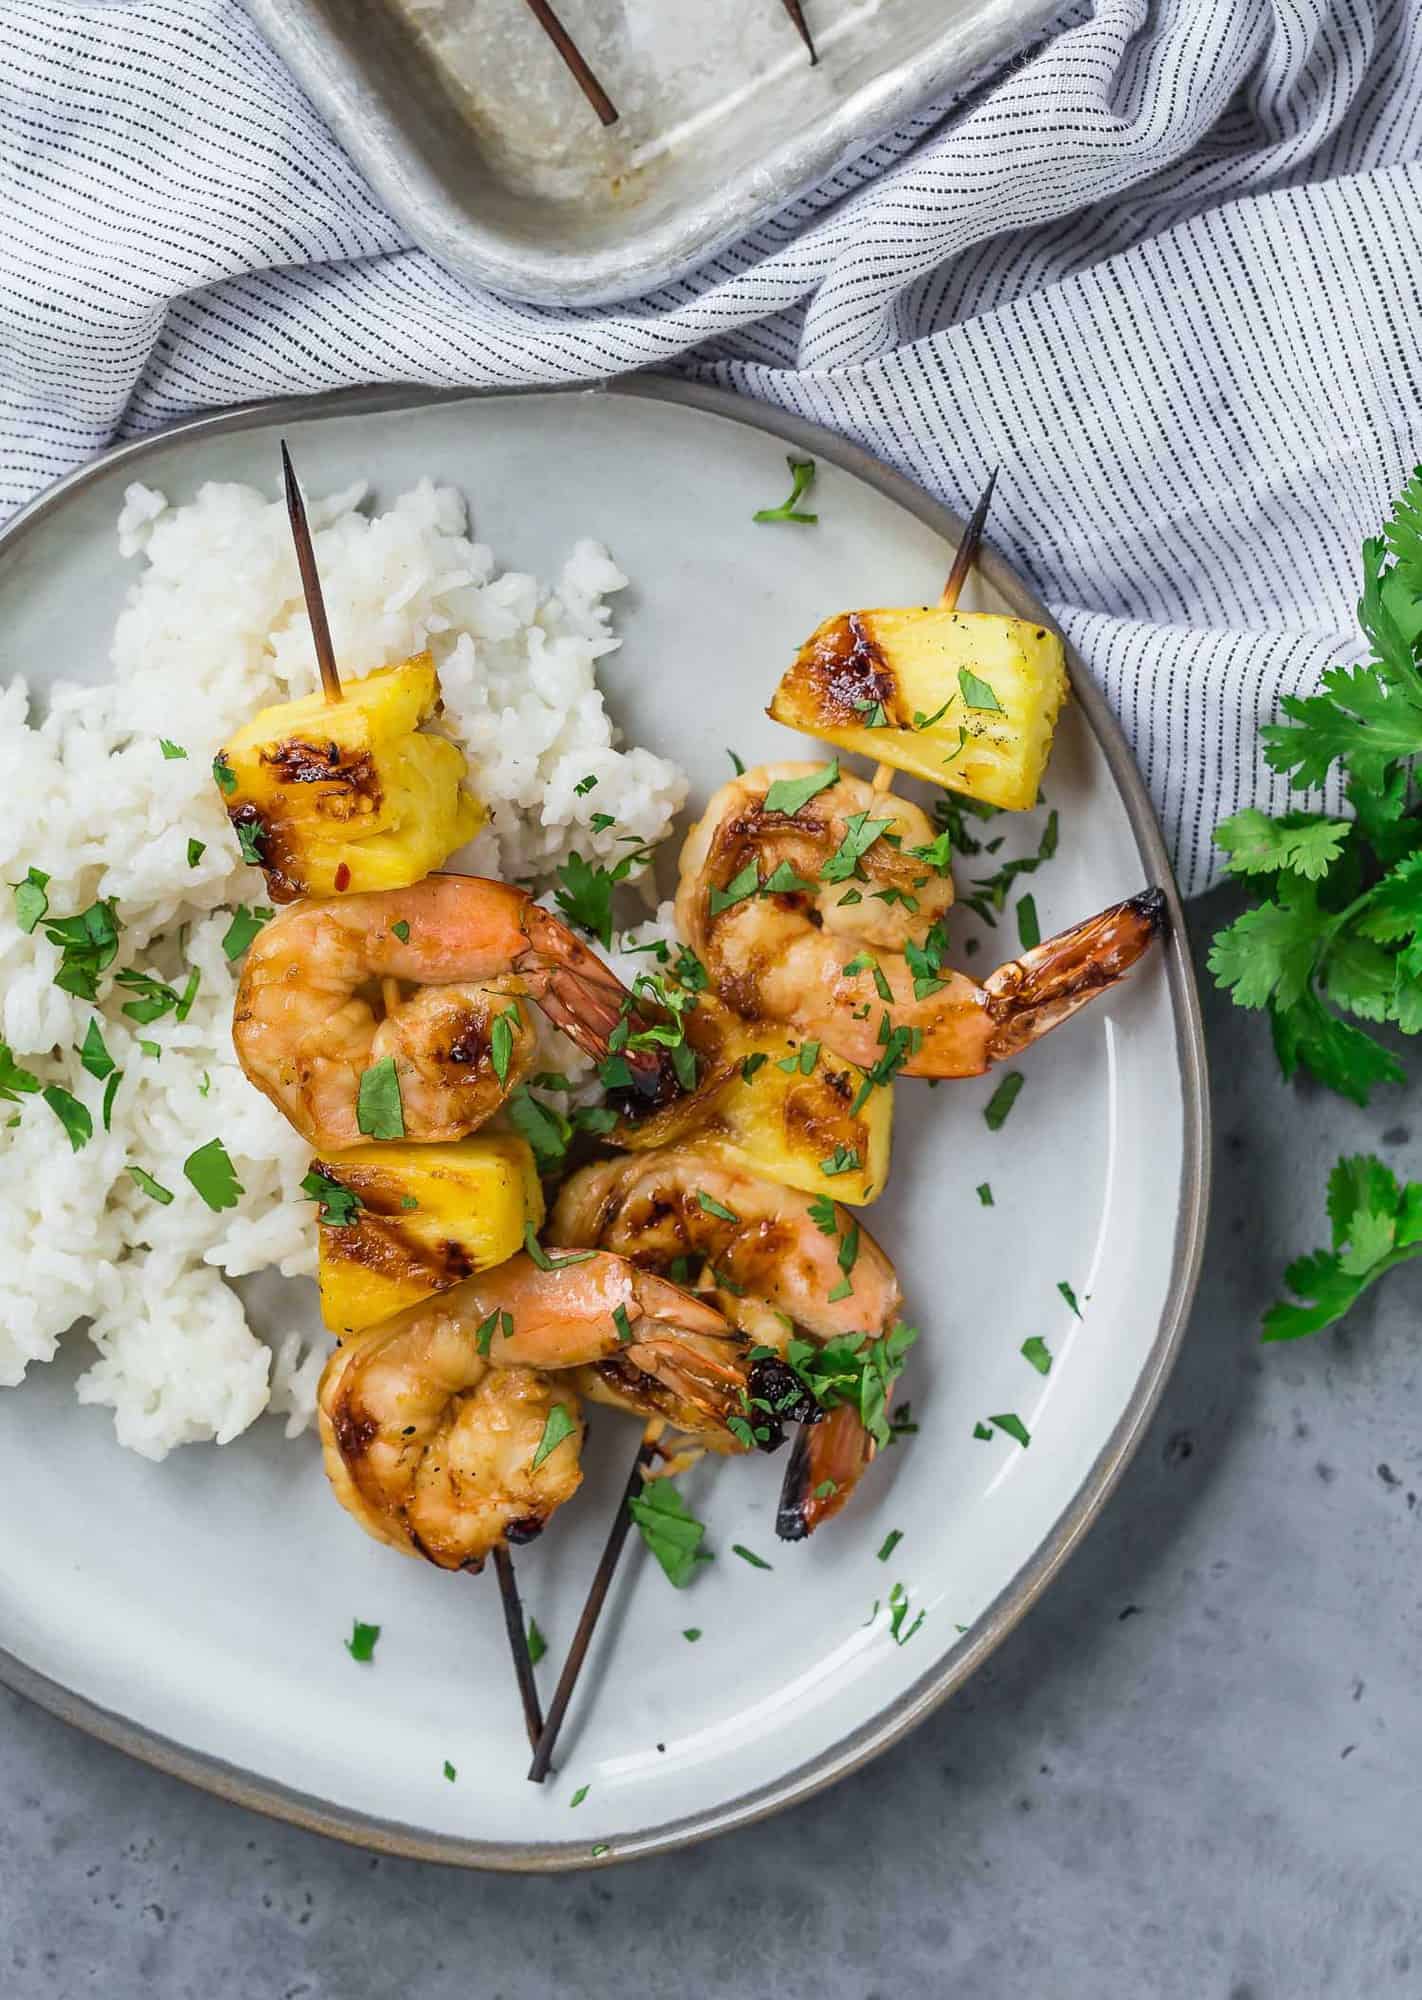 Overhead view of two grilled kabobs on a plate, with shrimp and fresh pineapple. They are served with white rice and sprinkled with fresh cilantro.